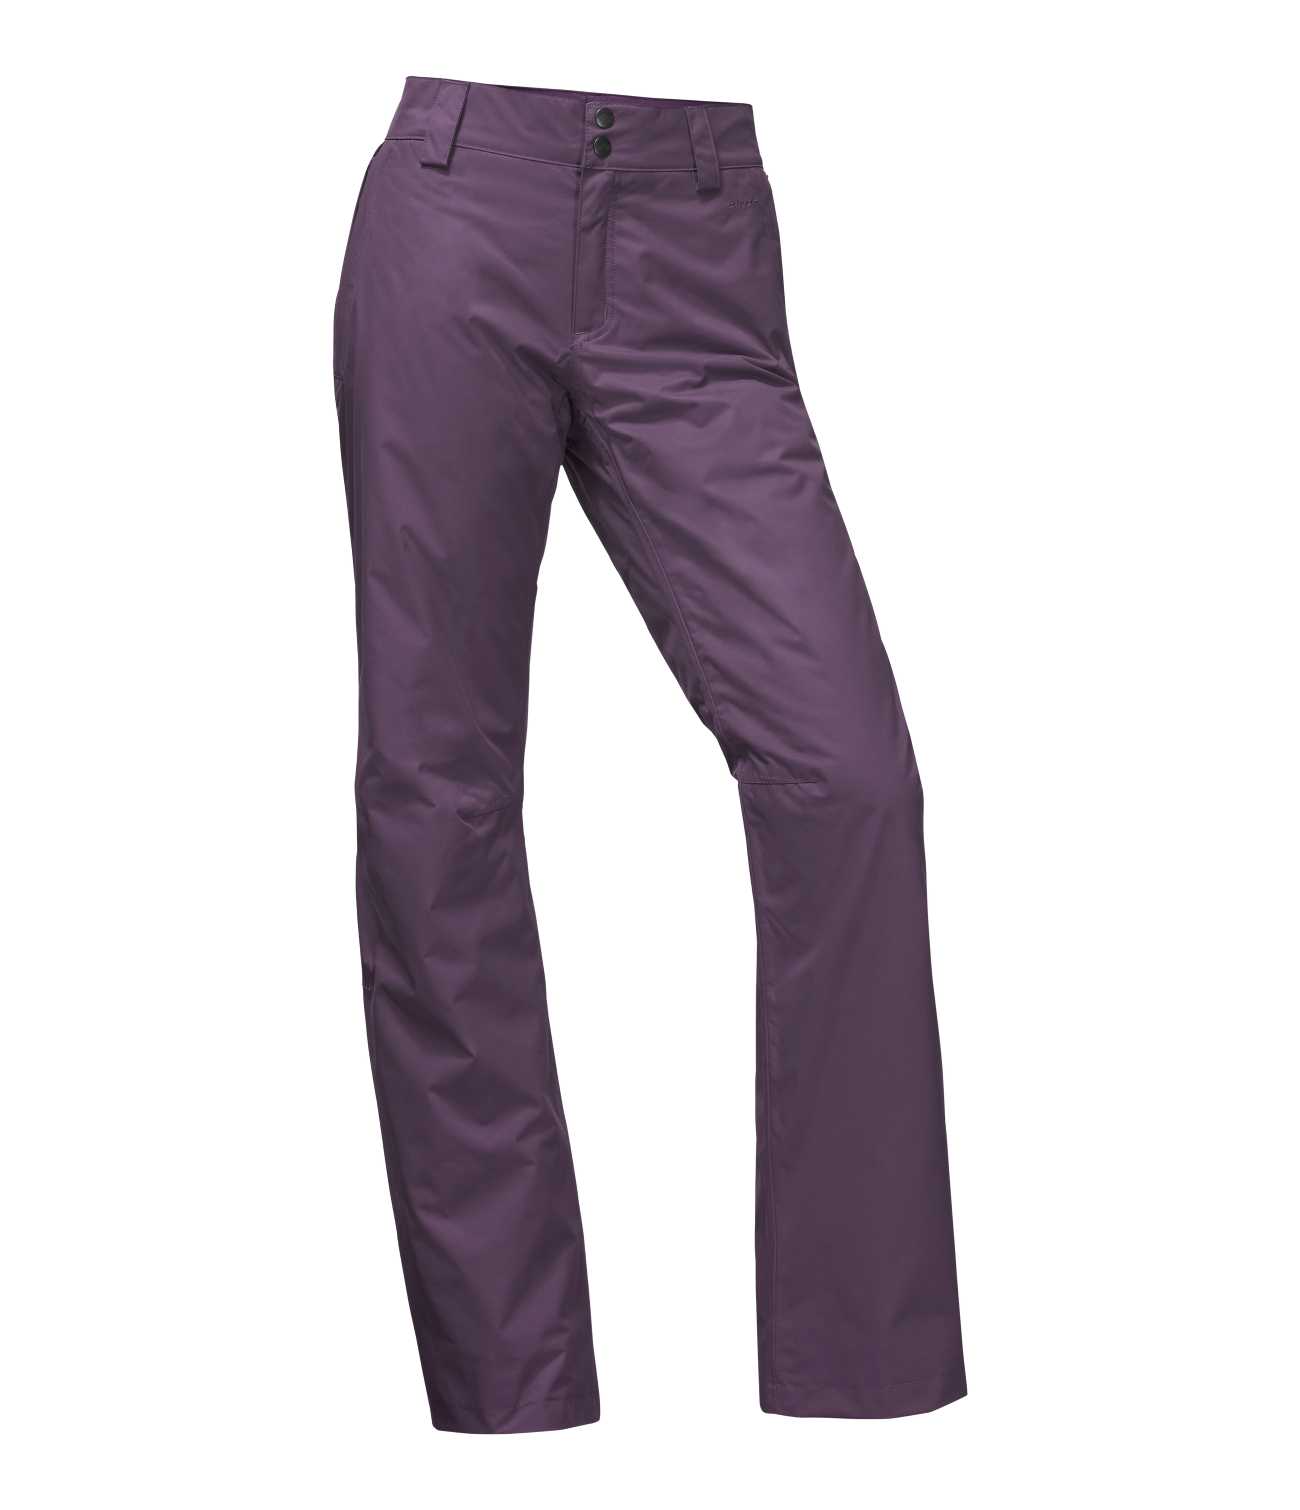 WOMEN'S SALLY PANTS, The North Face